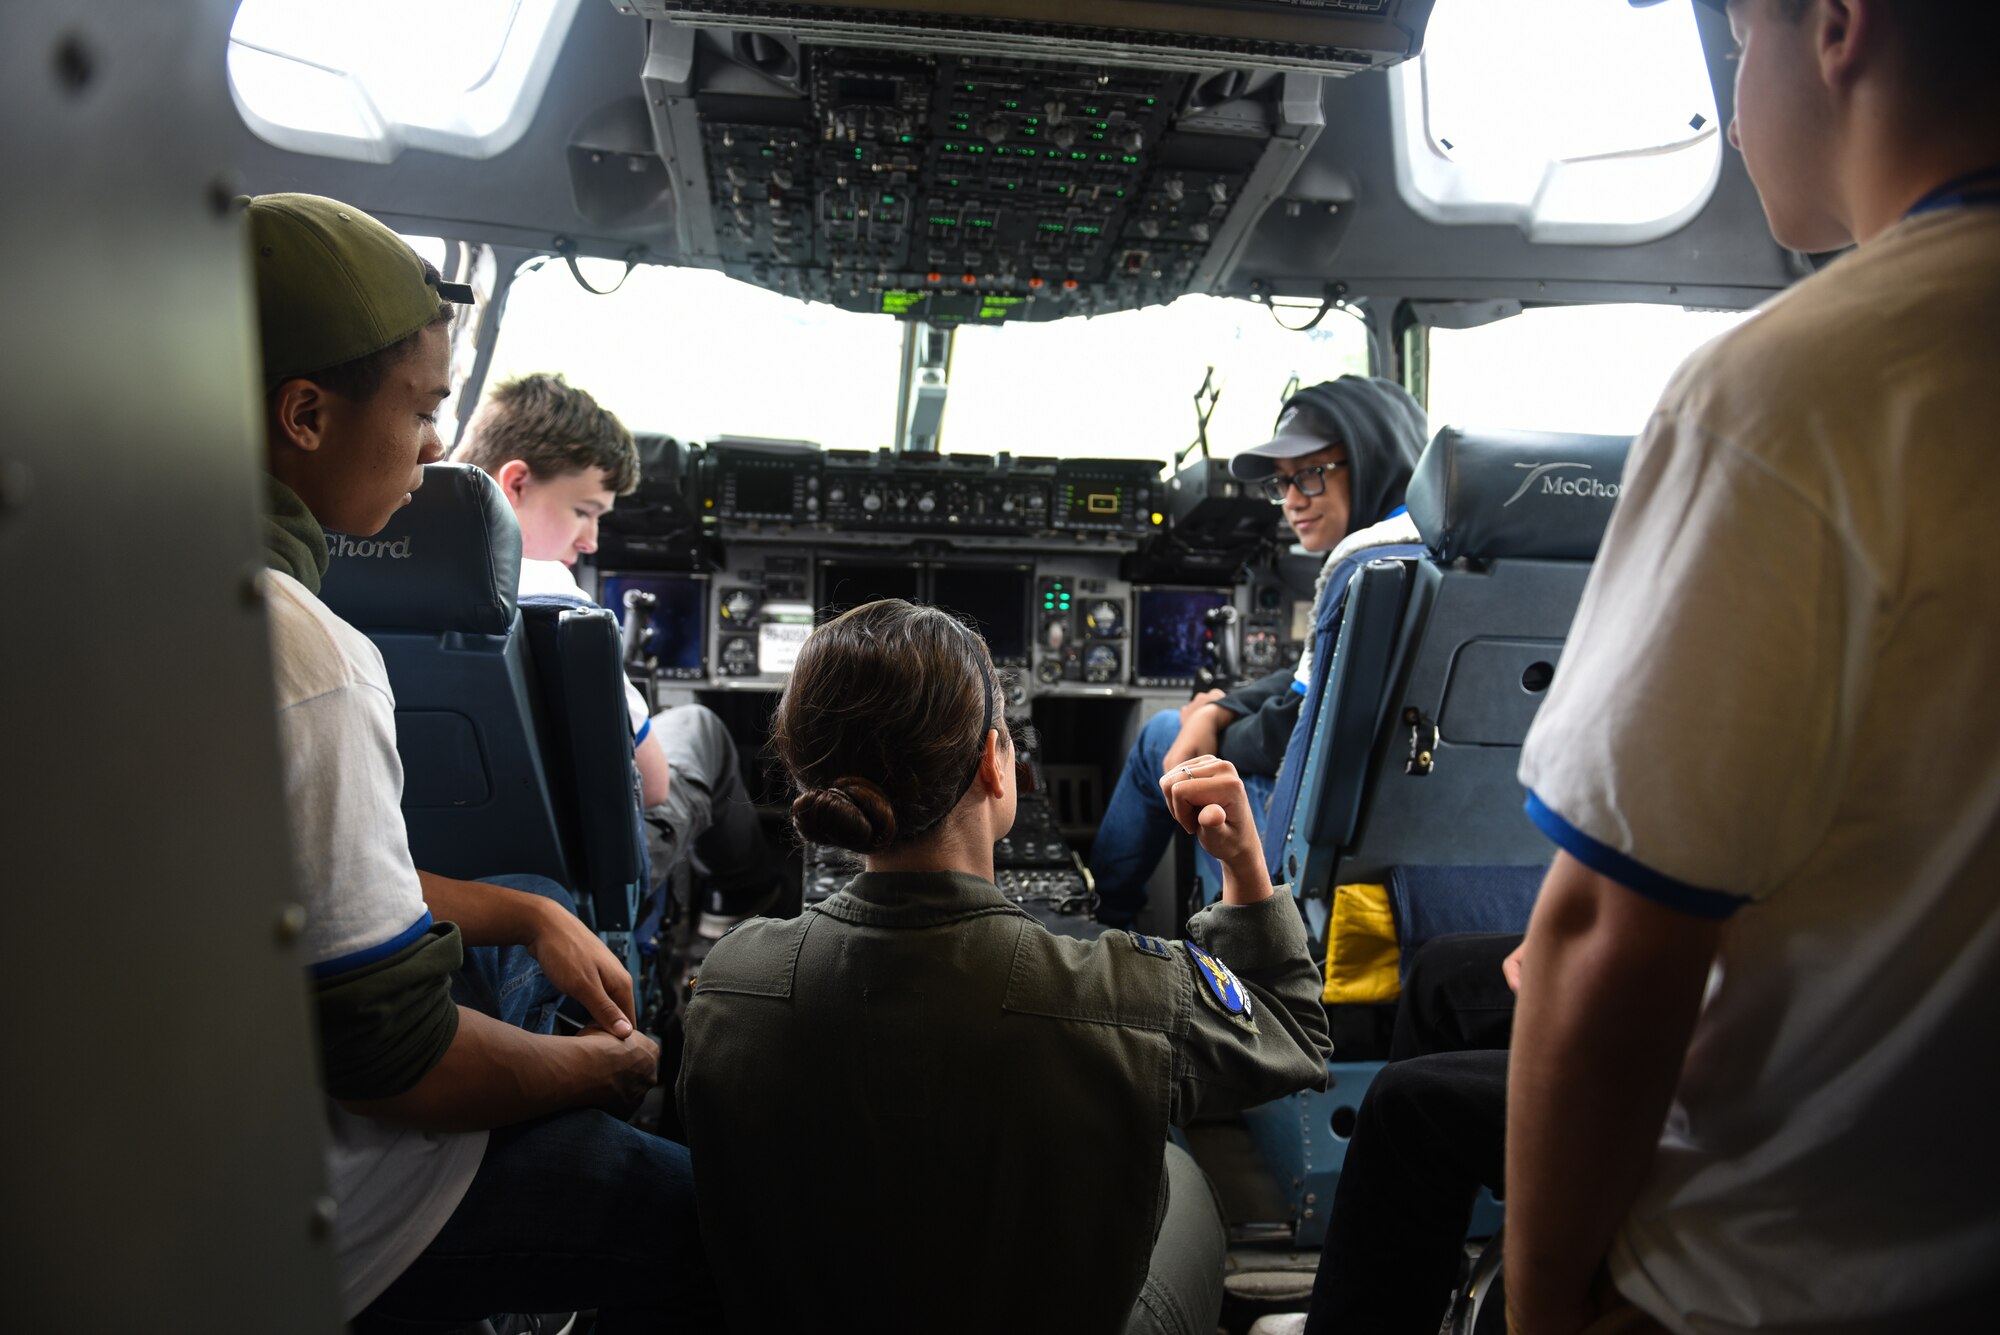 U.S. Capt. Gabriella Basham, 8th Airlift Squadron scheduler, provides a tour of a C-17 Globemaster III to Northwest Youth Leadership Conference attendees as part of Aviation Inspiration and Mentorship (AIM) Wing event at Joint Base Lewis-McChord, Washington, June 28, 2022. AIM Wing is a community outreach program to inform, influence and inspire the next generation of Air Force aviators. (U.S. Air Force photo by Master Sgt Julius Delos Reyes)